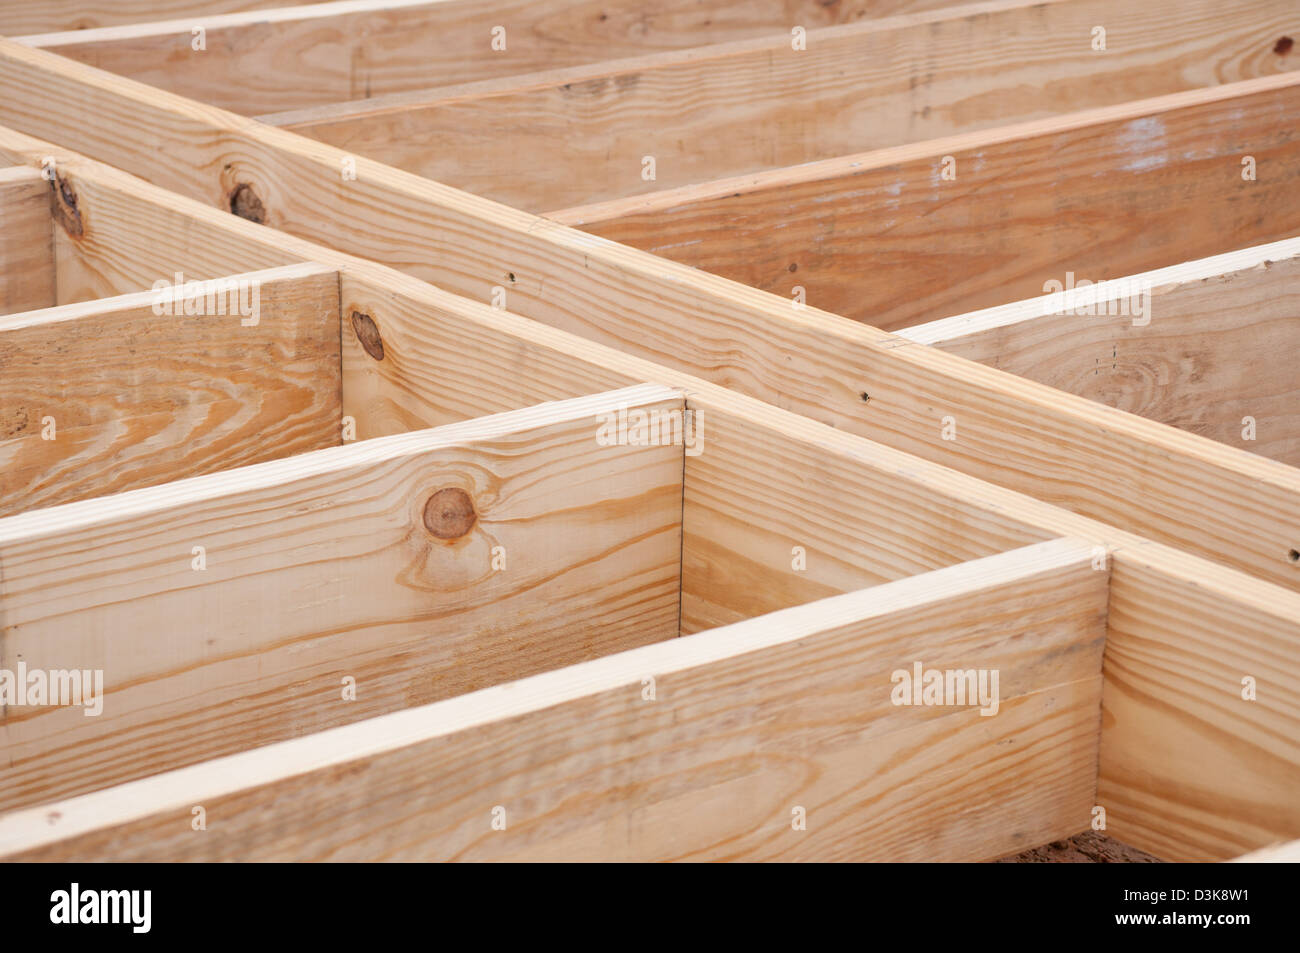 Floor joists made of lumber on construction site Stock Photo